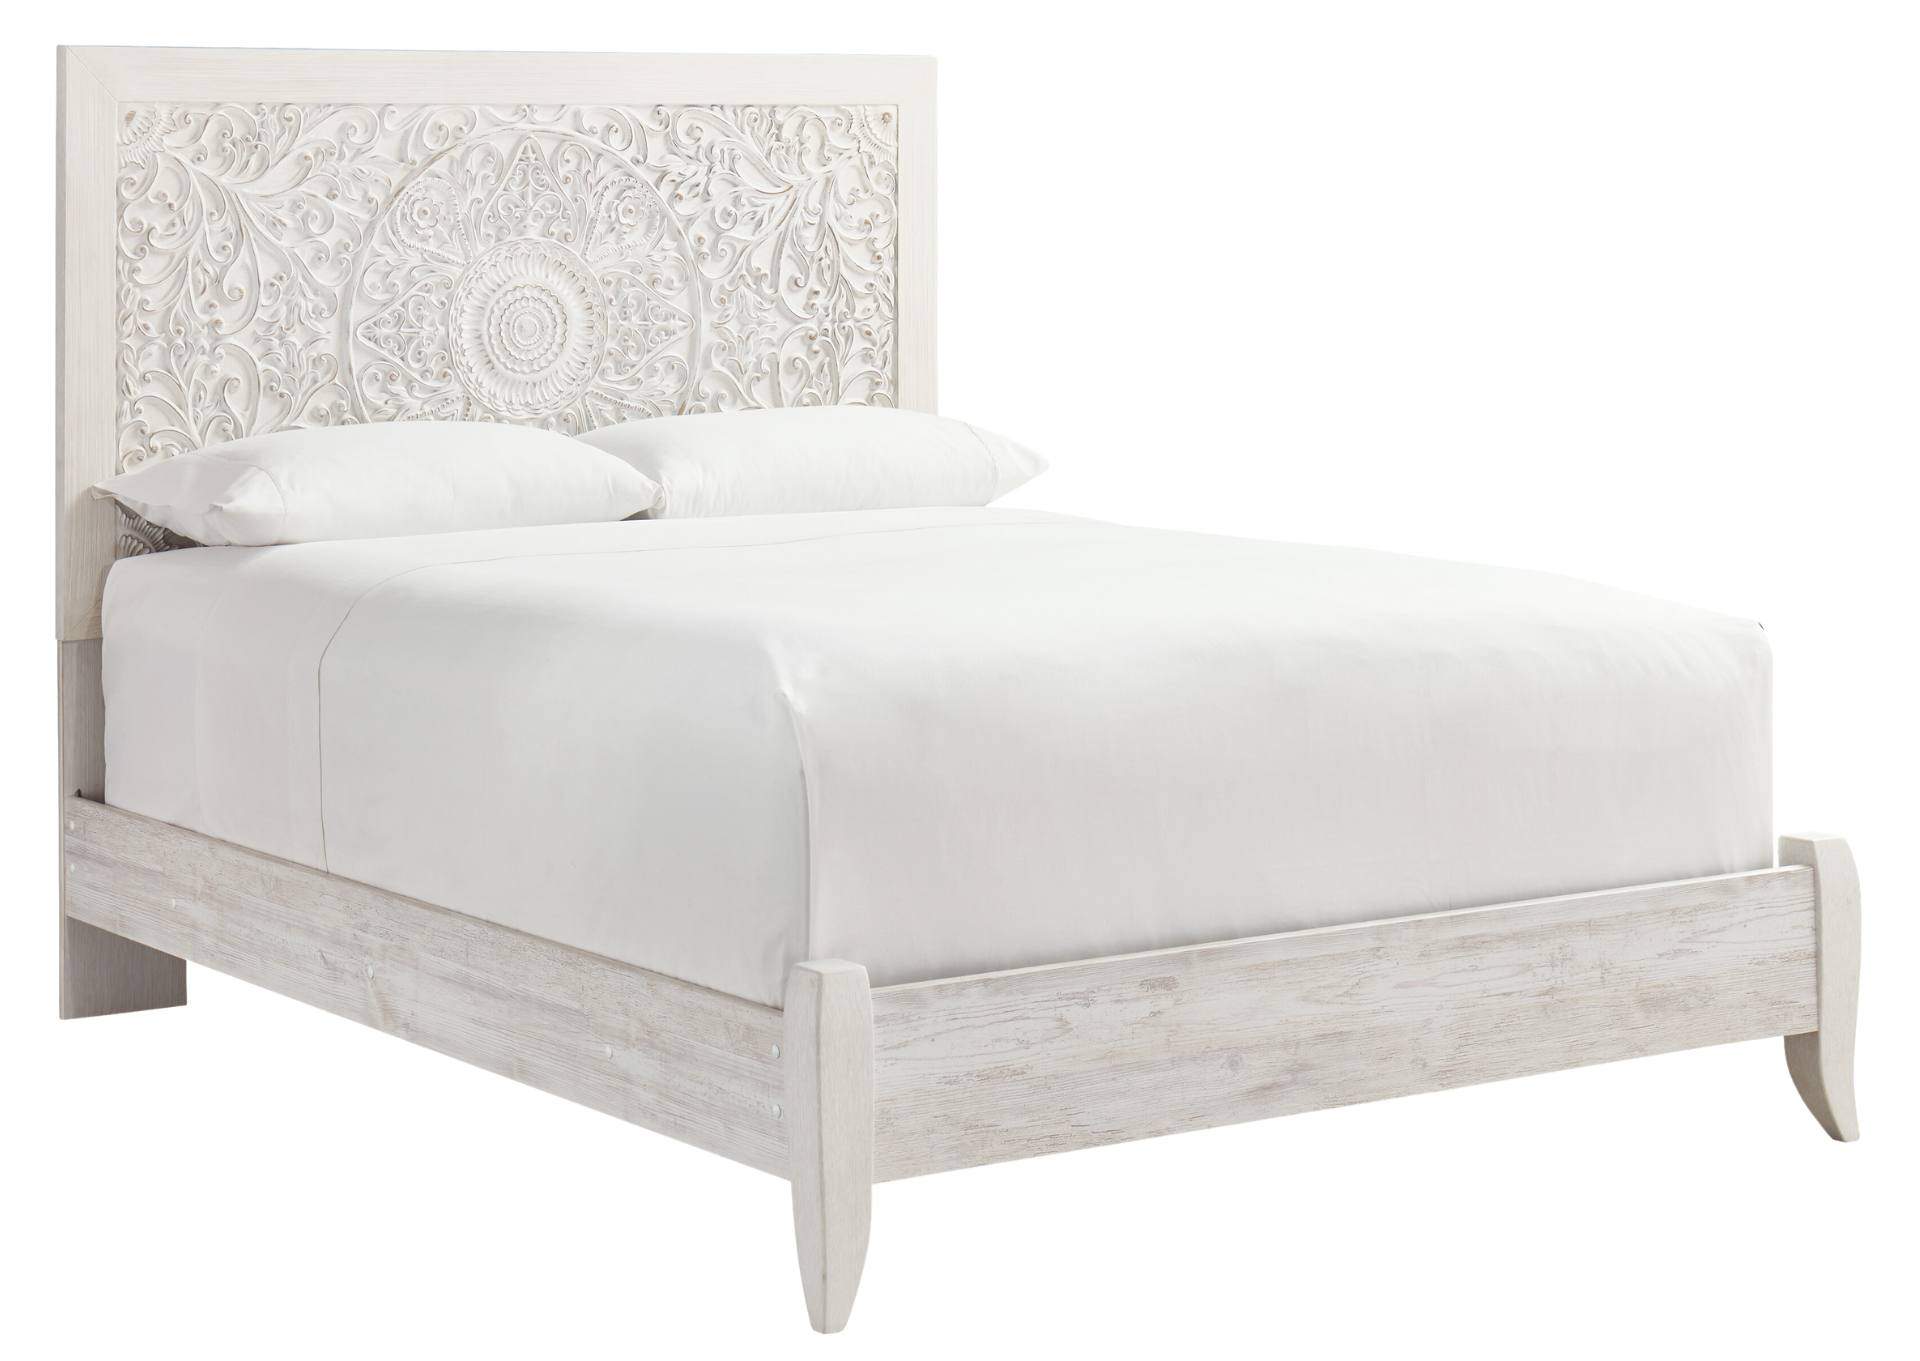 PAXBERRY FULL BED,ASHLEY FURNITURE INC.